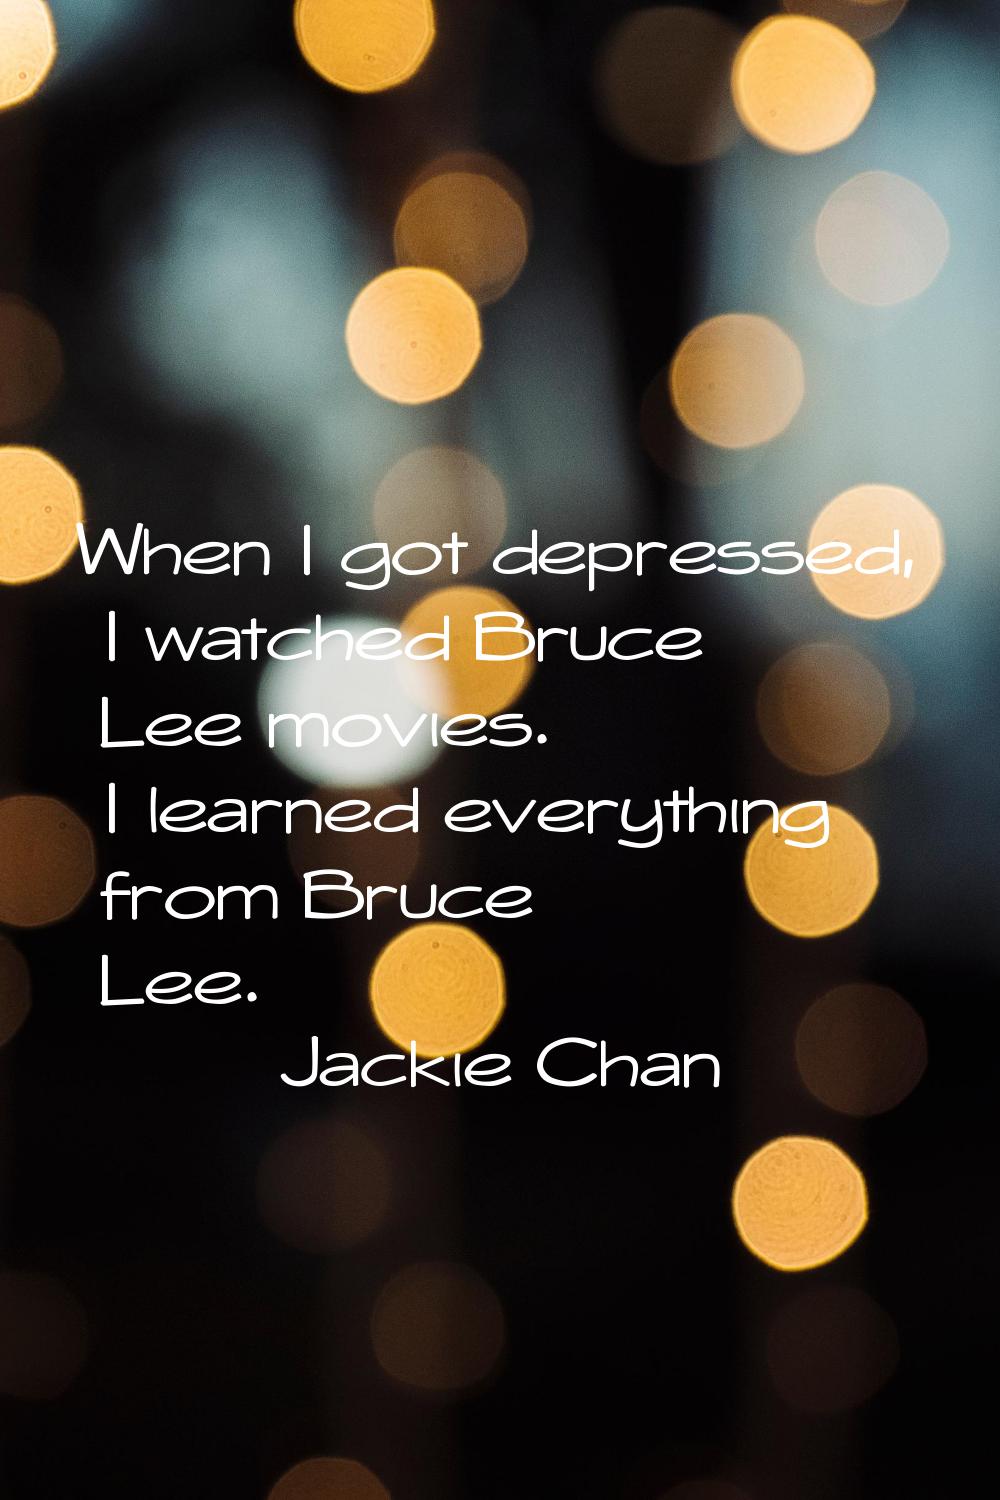 When I got depressed, I watched Bruce Lee movies. I learned everything from Bruce Lee.